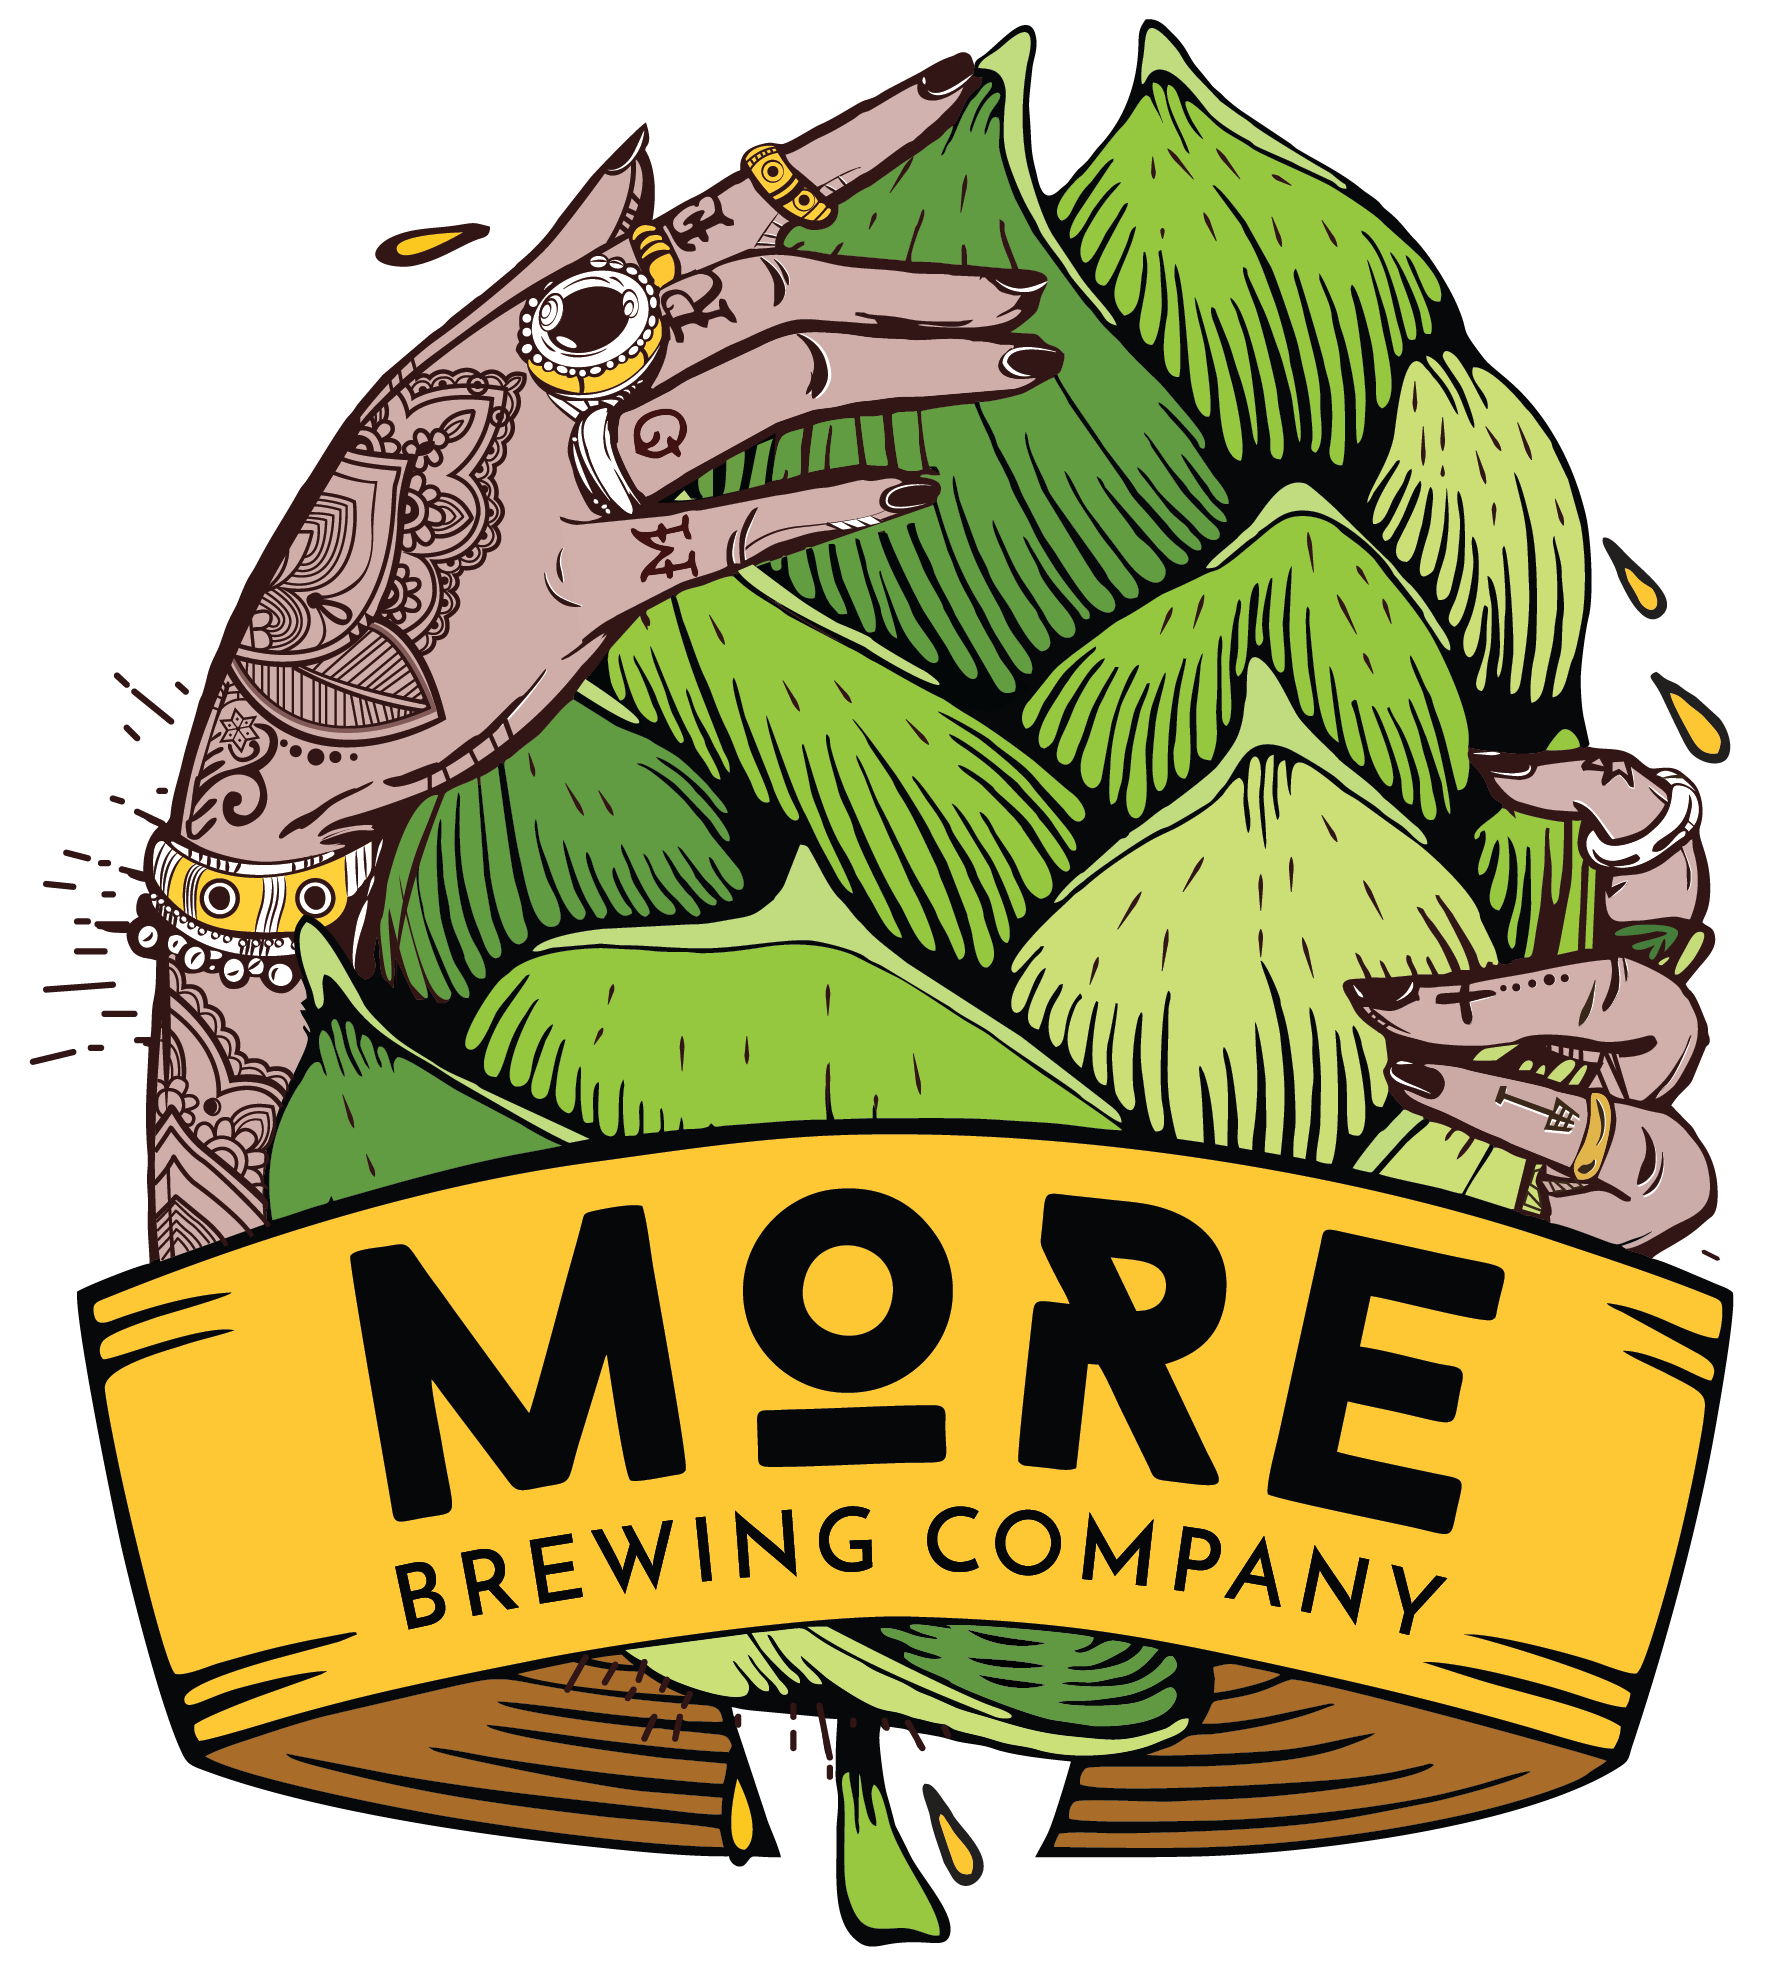 Episode 29 - More Brewing Company